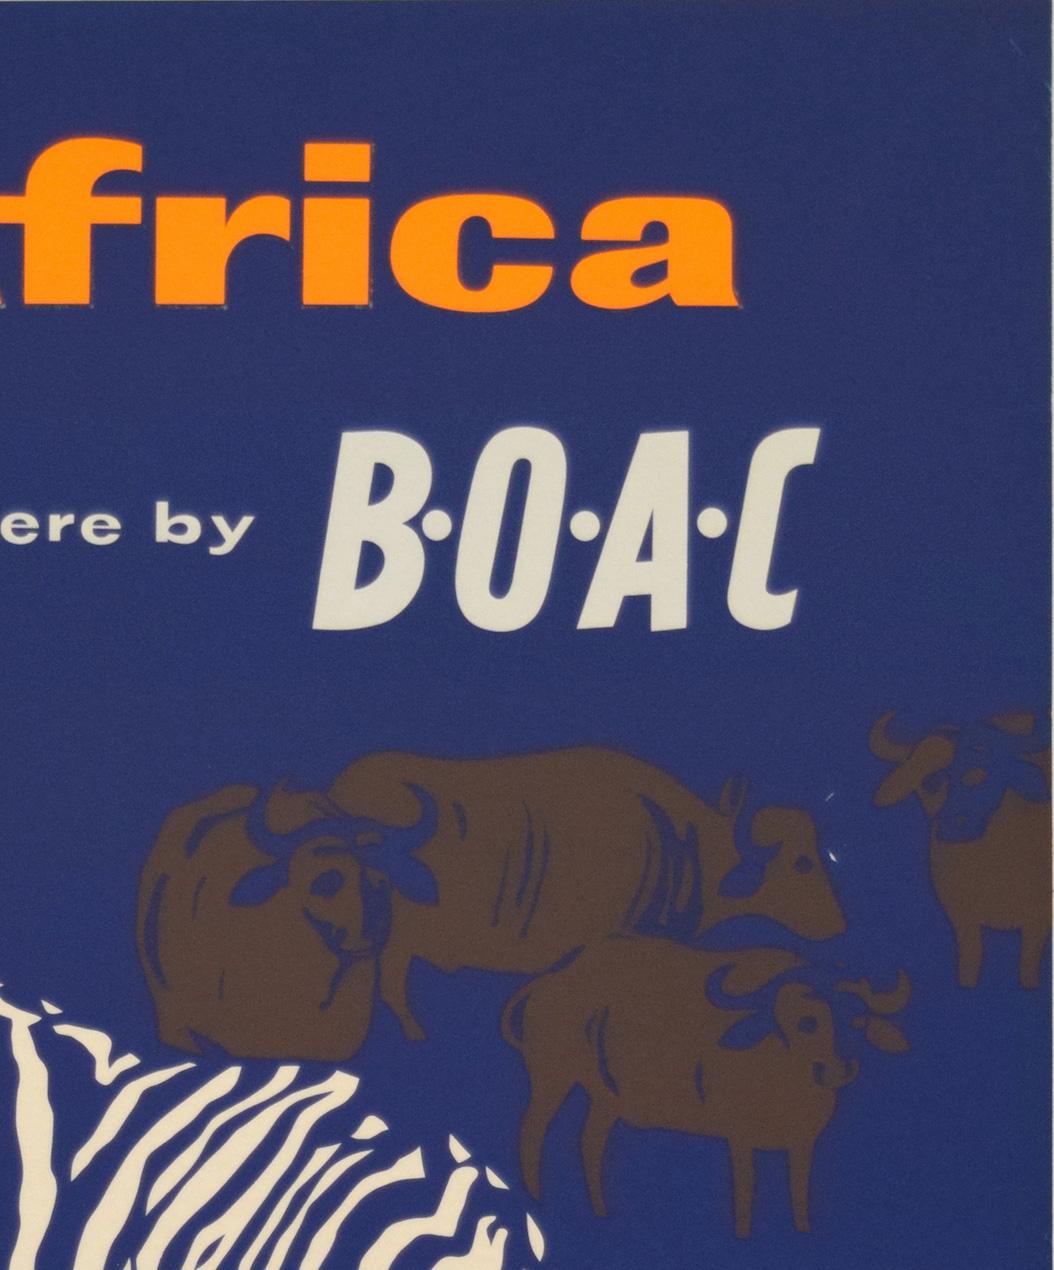 BOAC 1957 Africa travel poster. Striking, contemporary graphics feature on this fabulous midcentury British travel poster. Created by the British Overseas Airways Corporation to advertise travel to Africa. A very rare, highly collectible